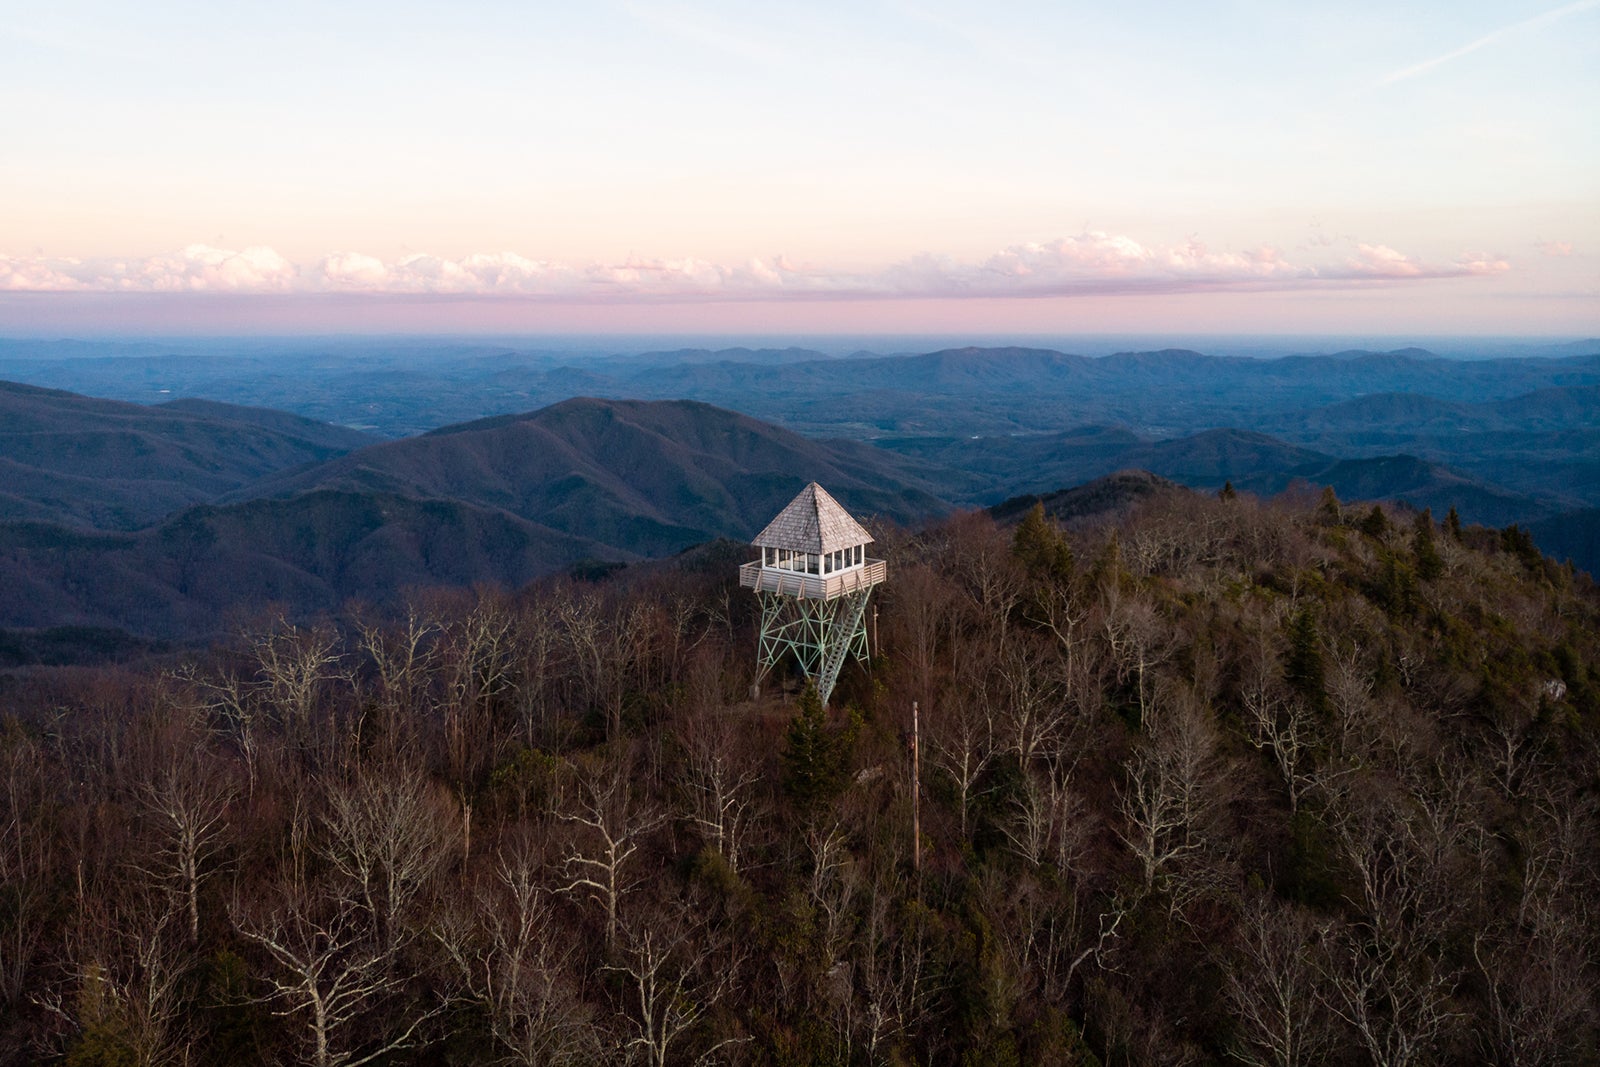 Green Knob Lookout Tower near Blue Ridge Parkway in North Carolina in winter